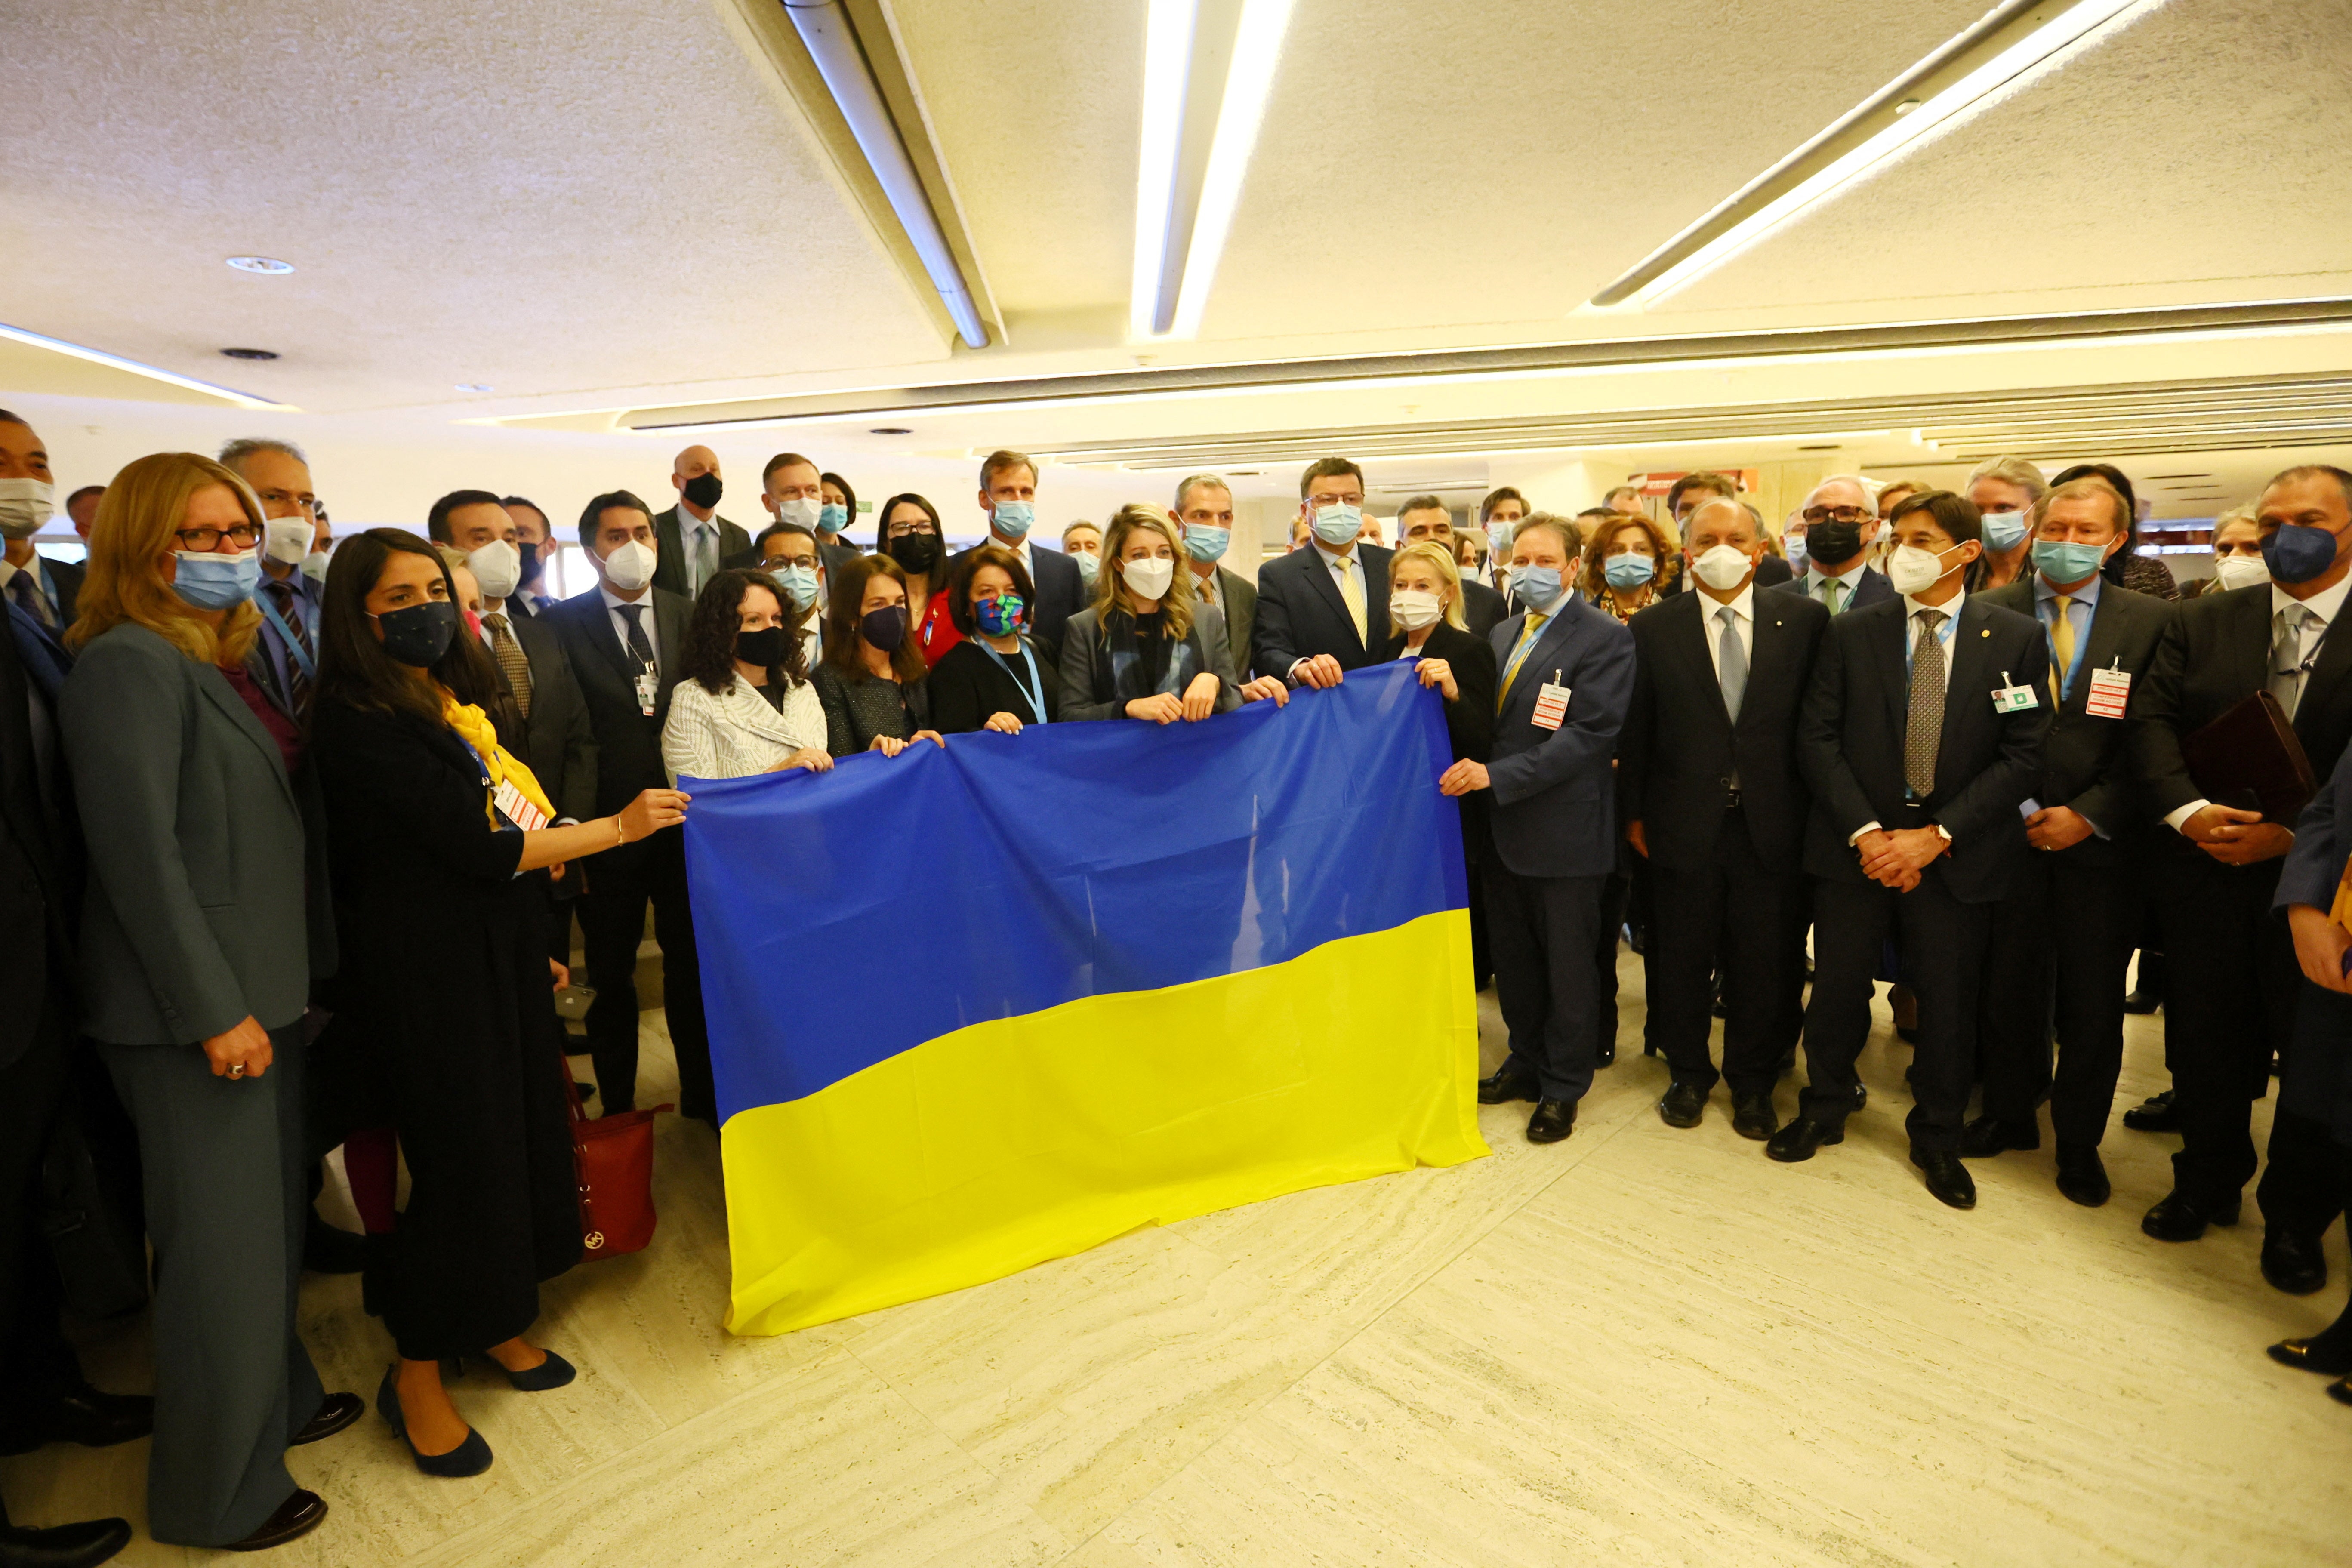 Melanie Joly, Minister of Foreign Affairs of Canada, Ukraine's ambassador Yevheniia Filipenko and other delegates gathered with a Ukrainian flag after walking out of the Human Rights Council meeting.